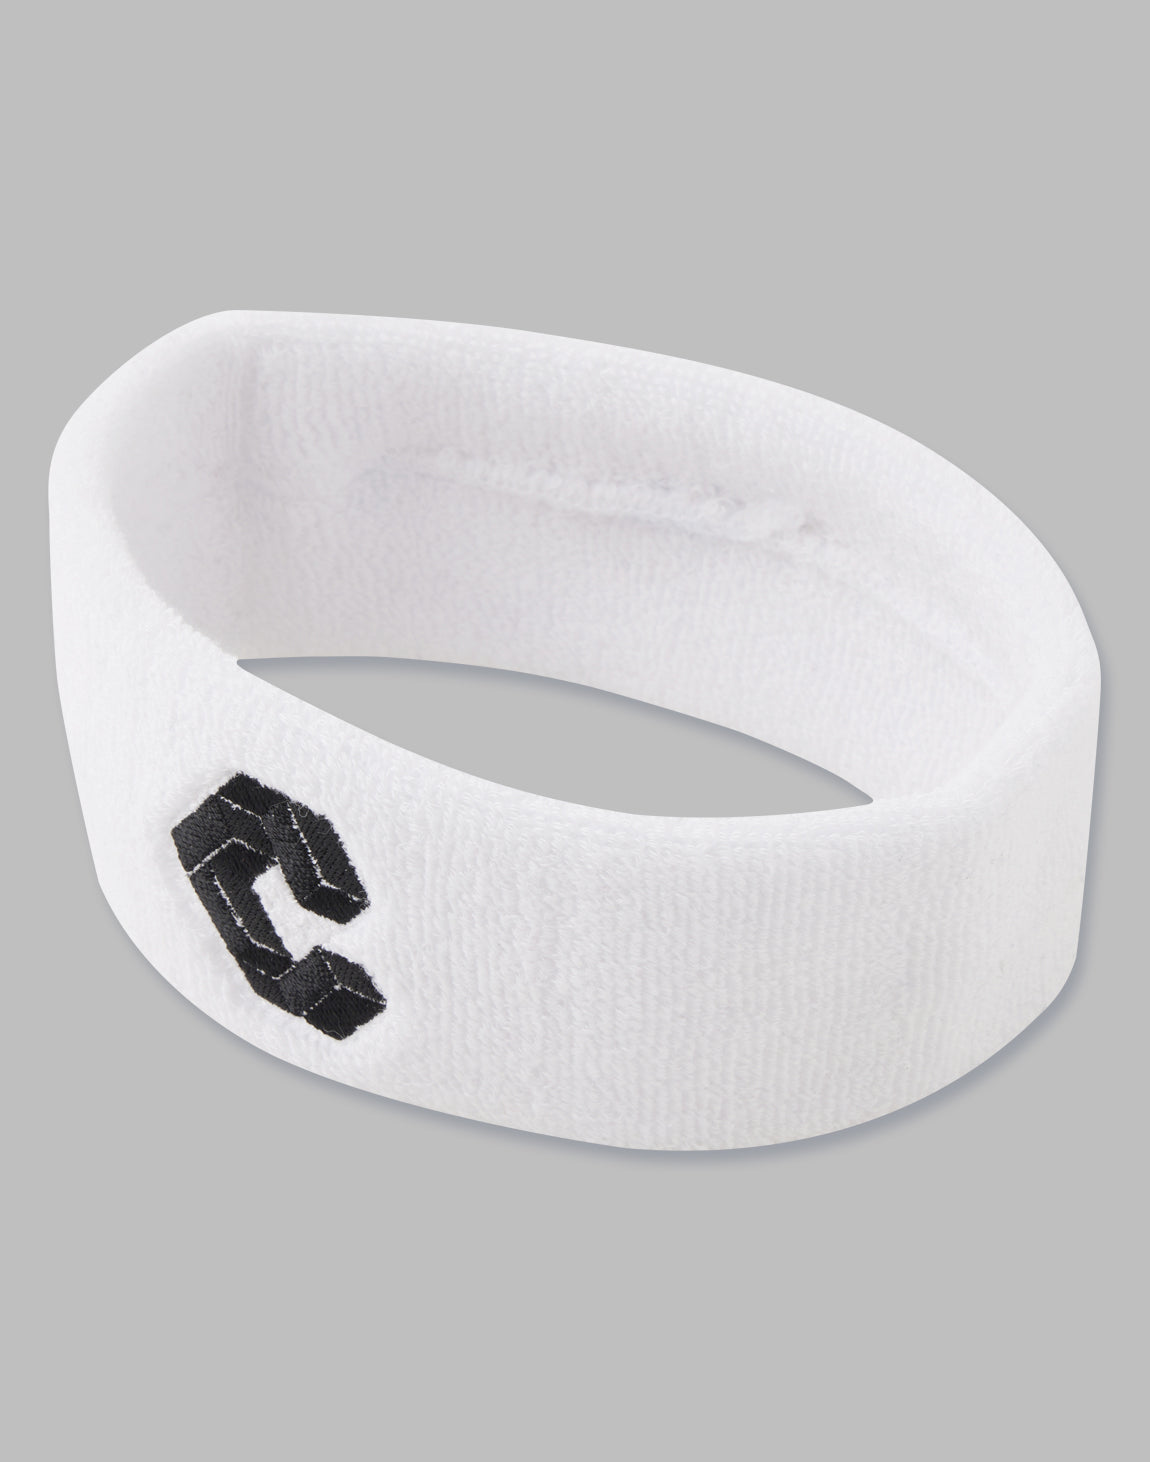 CRONOS HEAD BAND – クロノス CRONOS Official Store